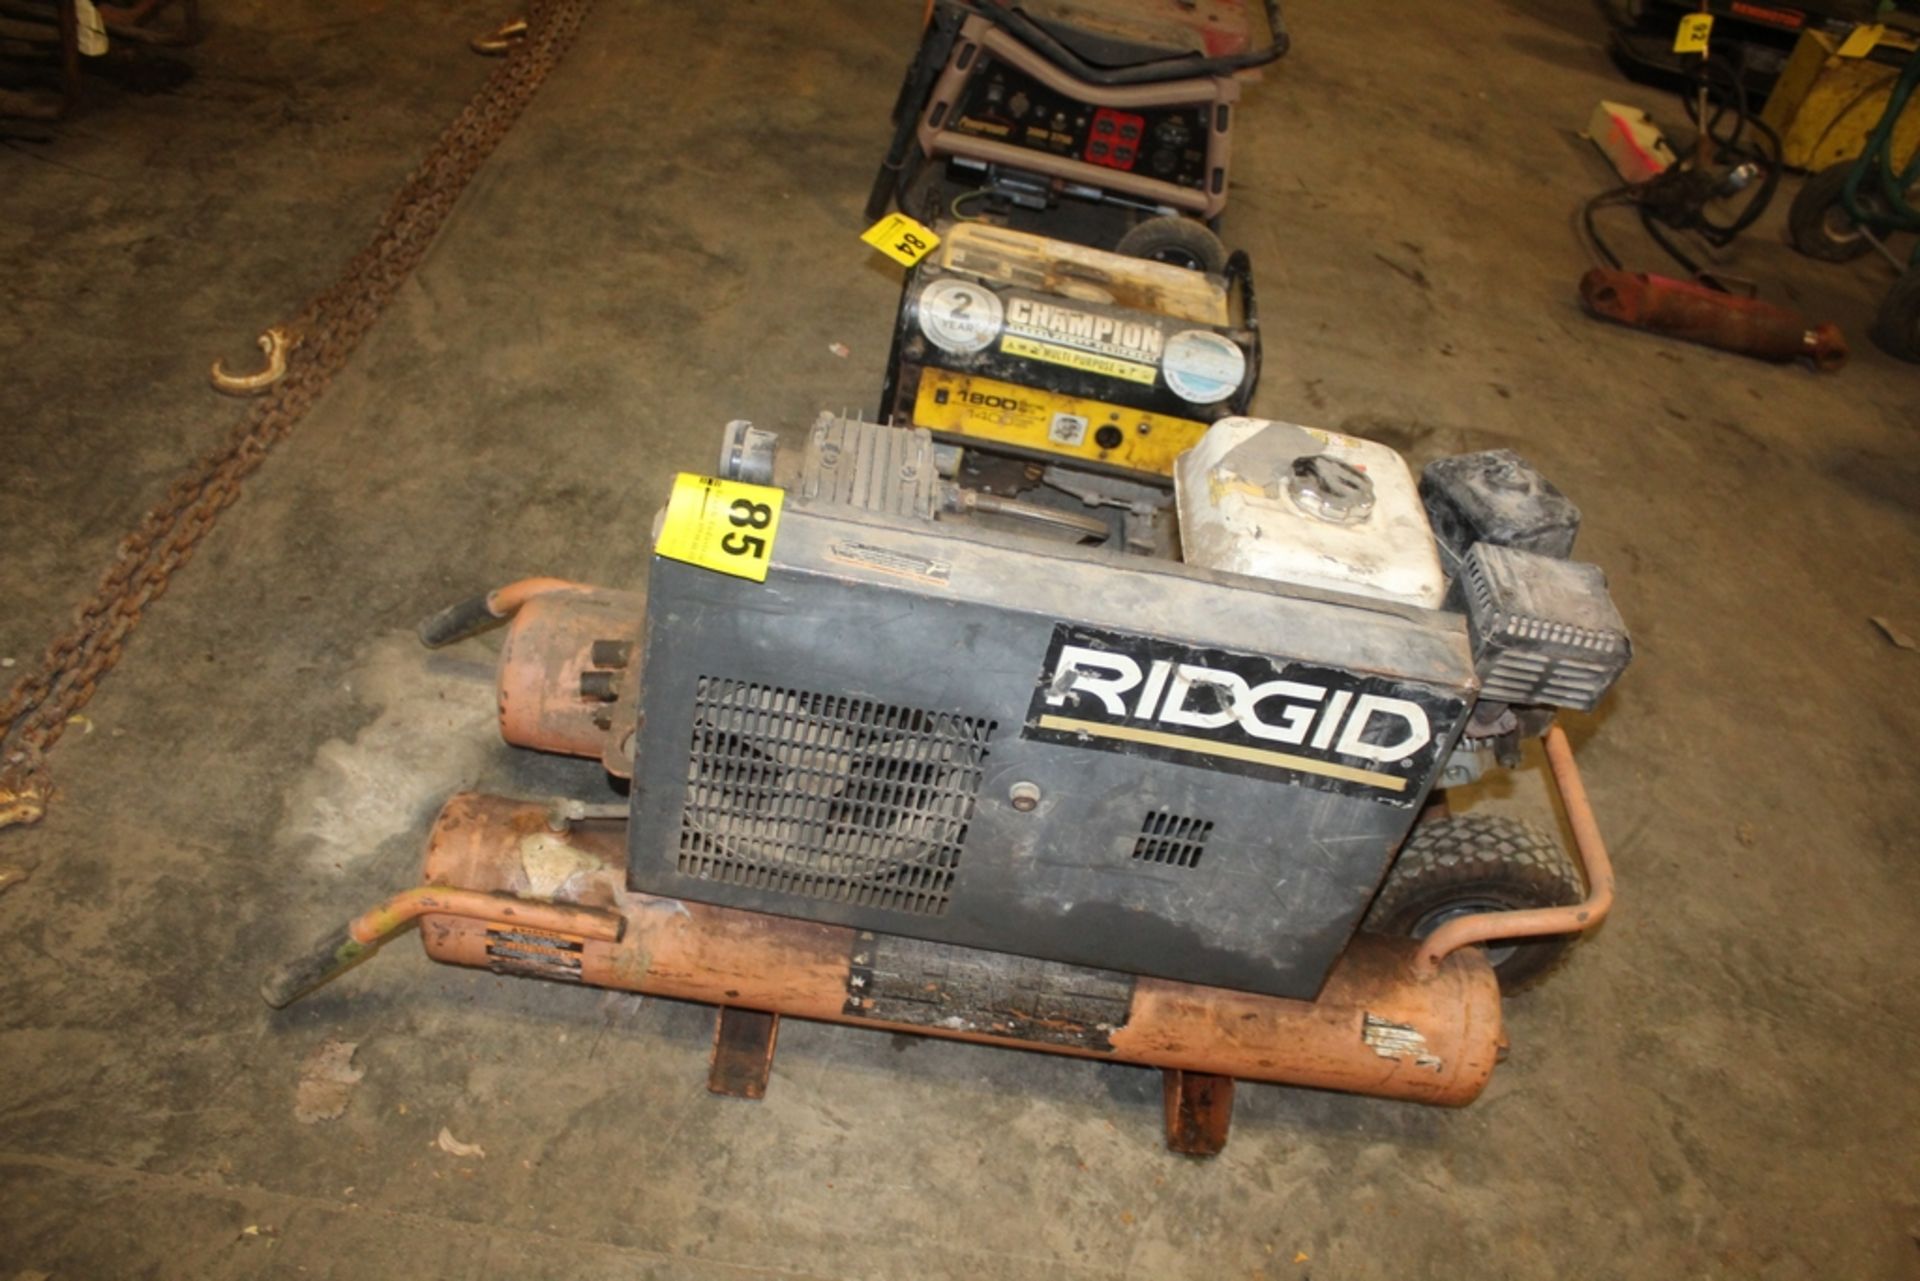 RIDGID PORTABLE GAS POWERED TWIN TANK AIR COMPRESSOR, WITH ALL POWER 6.5 HP MOTOR - Image 2 of 2